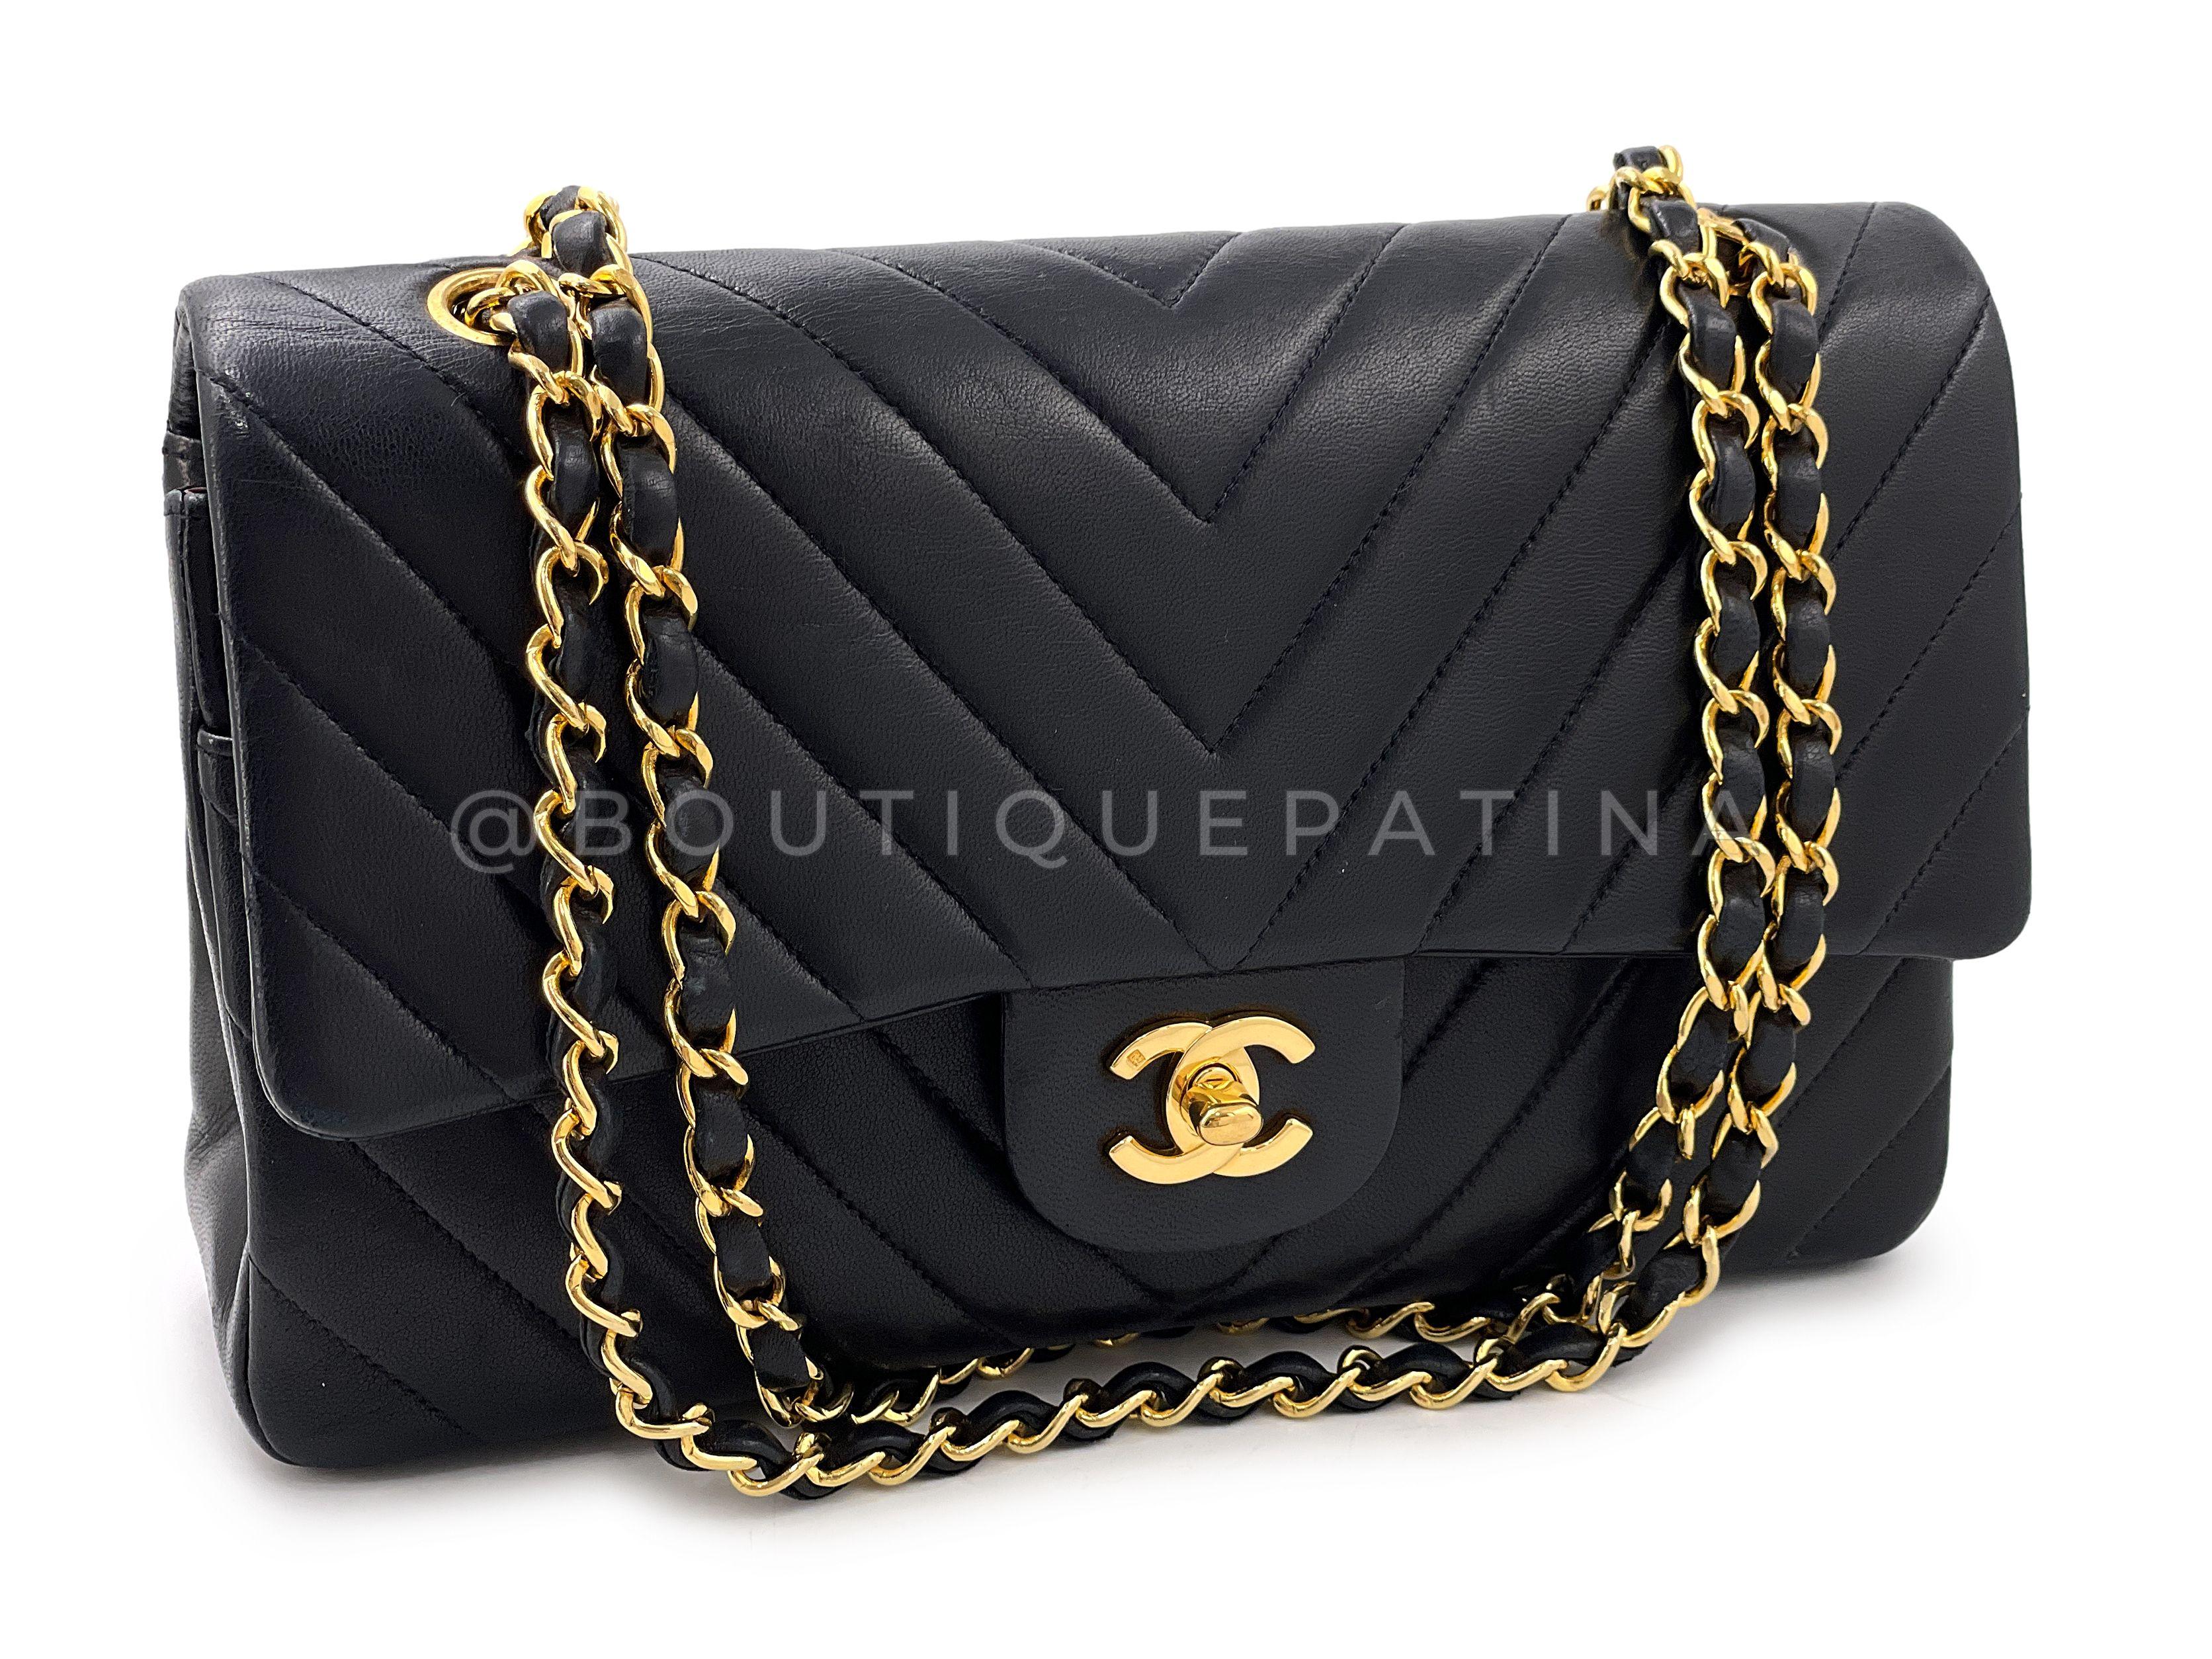 Store item: 67013
We search far and wide for early-90s vintage chevron classics in great condition. We love the thick, buttery lambskin and 24k gold plated hardware and supreme, sturdy structure.

The iconic holy grail bag is the Chanel Classic